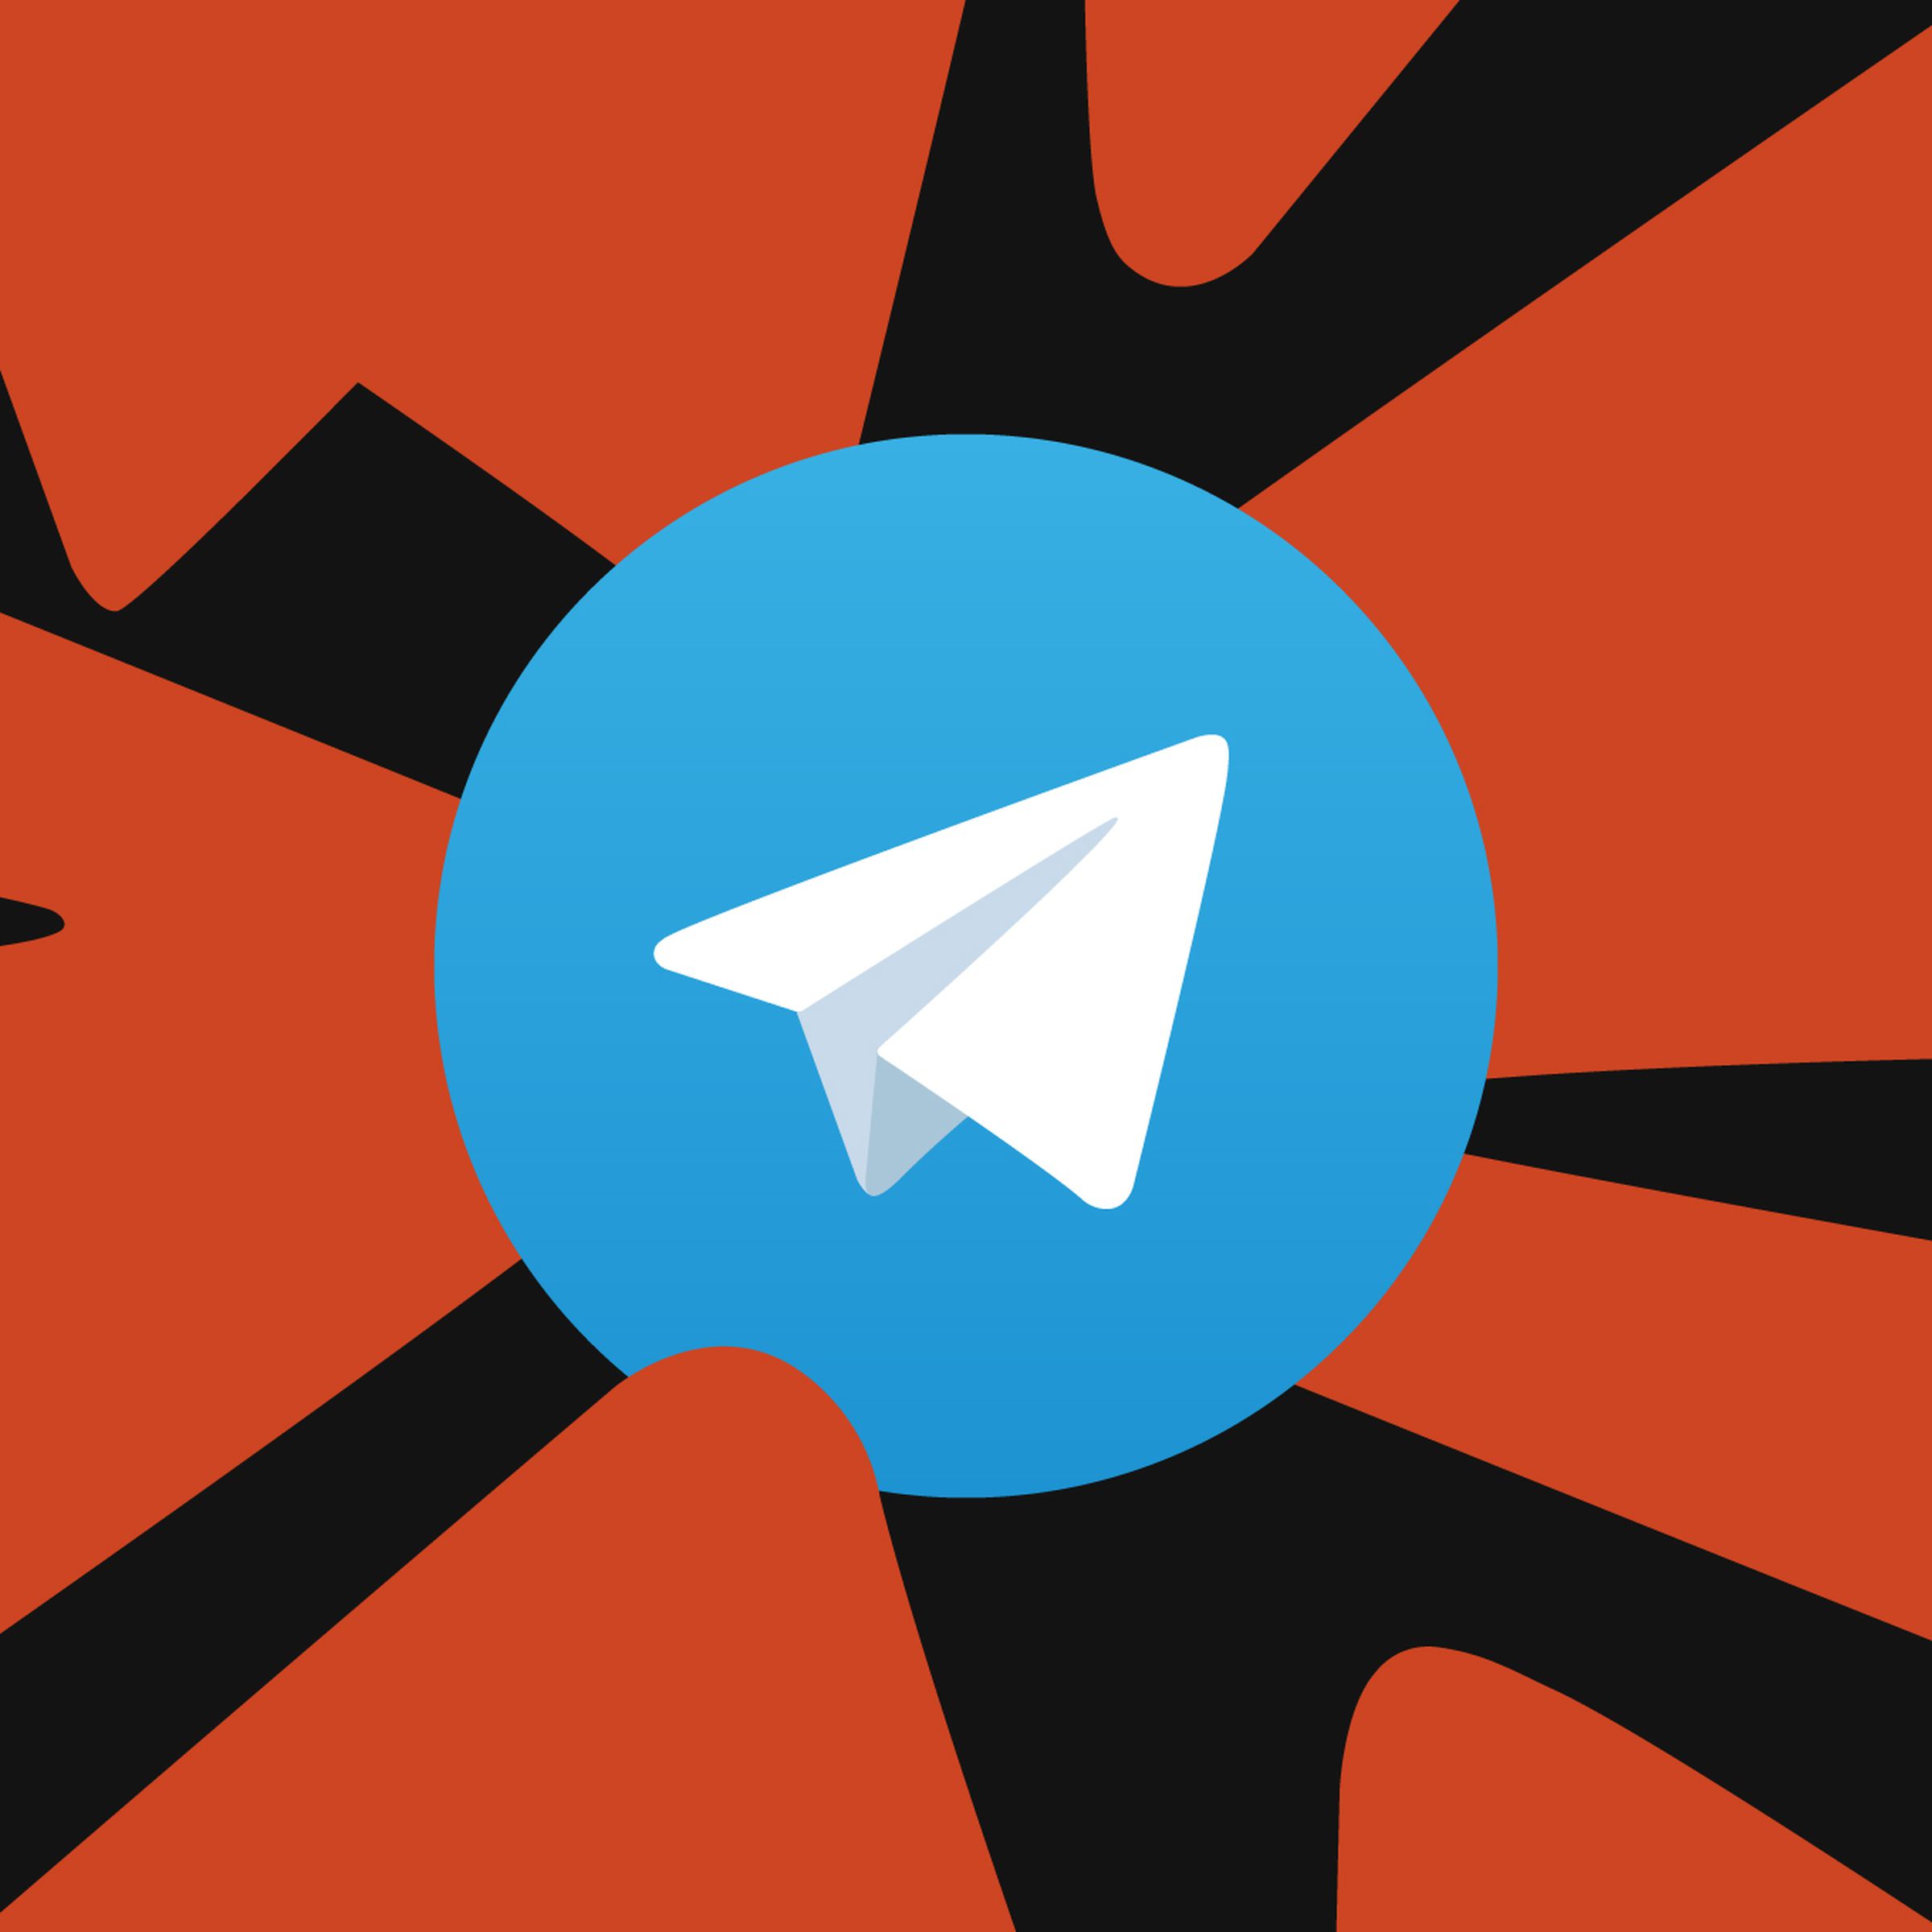 The Telegram logo on a black and red background